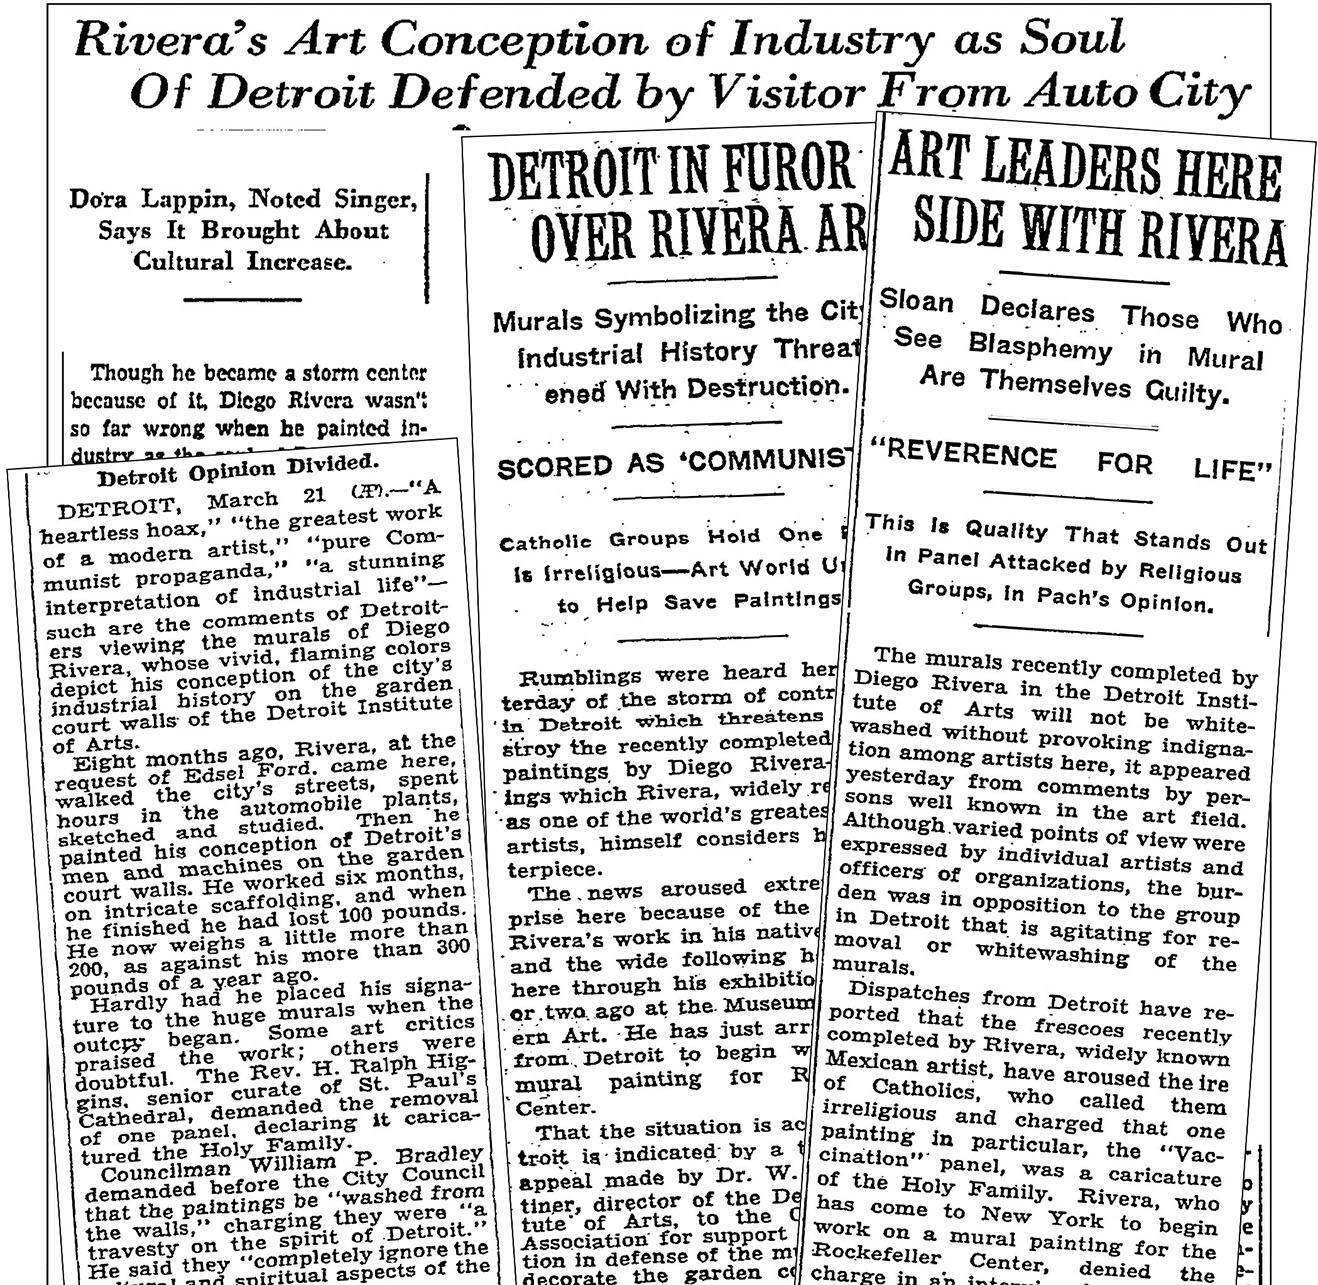 Newspaper headlines and columns underscore the reaction to Rivera’s Detroit Industry murals in the 1930s.